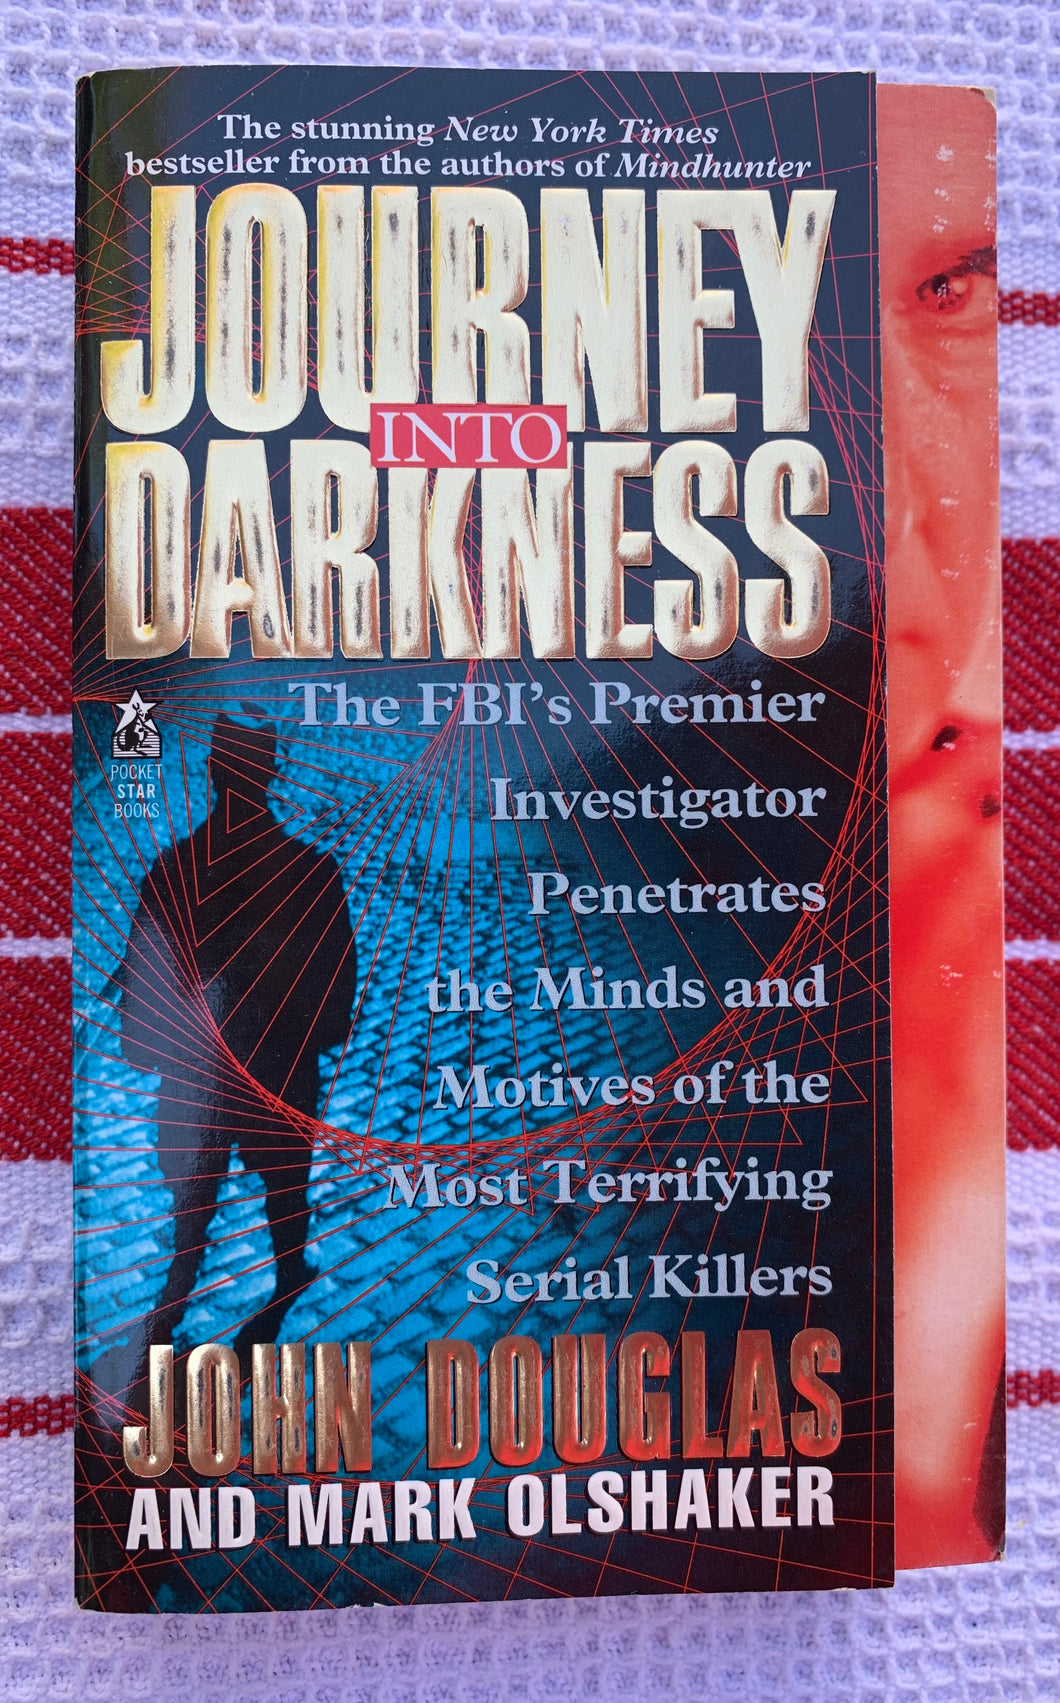 Journey Into Darkness: The FBI's Premier Investigator Penetrates the Minds and Motives of the Most Terrifying Serial Killers